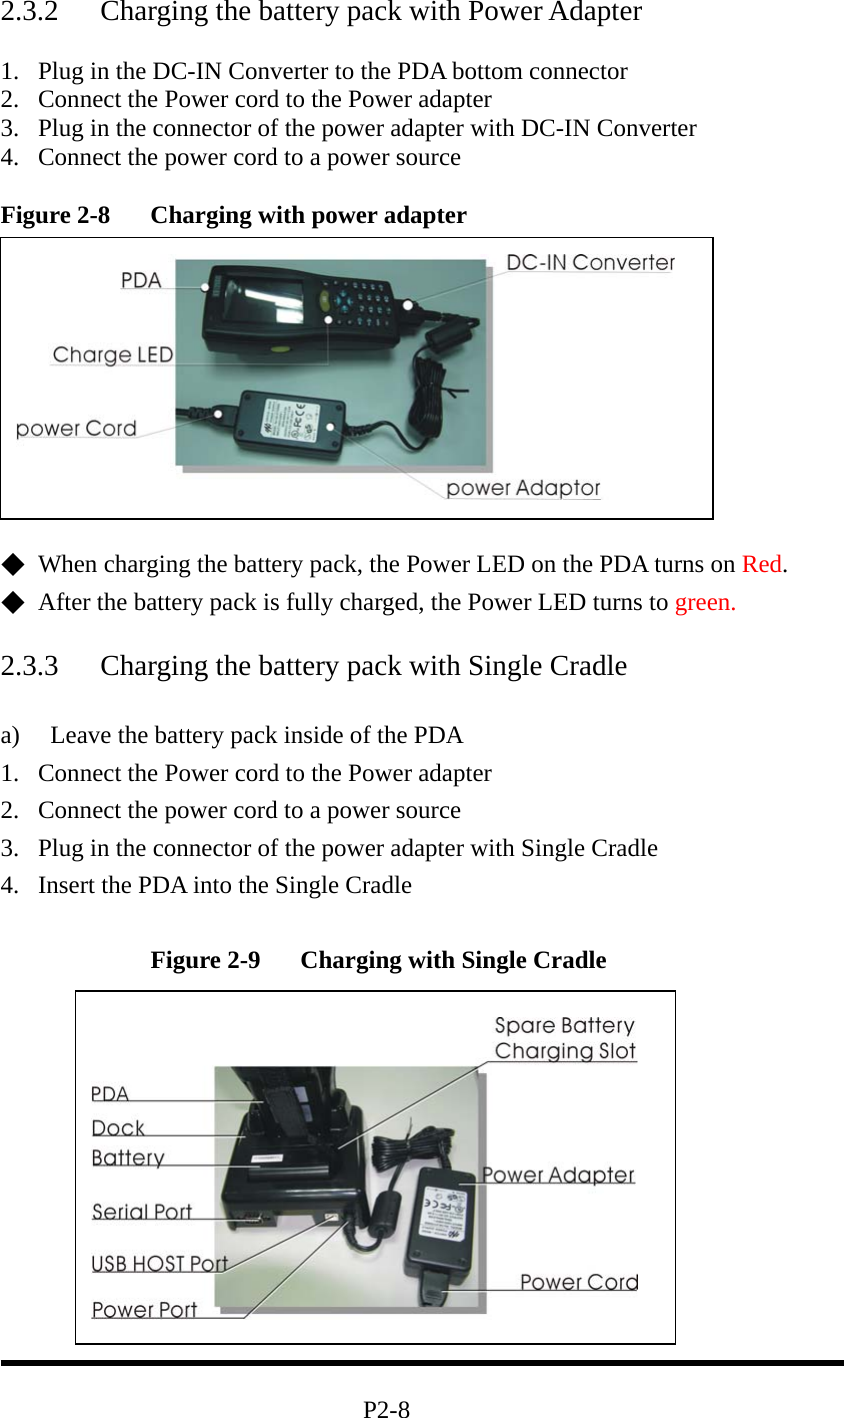 2.3.2  Charging the battery pack with Power Adapter  1.  Plug in the DC-IN Converter to the PDA bottom connector   2.  Connect the Power cord to the Power adapter 3.  Plug in the connector of the power adapter with DC-IN Converter   4.  Connect the power cord to a power source  Figure 2-8  Charging with power adapter            ◆  When charging the battery pack, the Power LED on the PDA turns on Red.  ◆  After the battery pack is fully charged, the Power LED turns to green.  2.3.3  Charging the battery pack with Single Cradle  a)  Leave the battery pack inside of the PDA 1.  Connect the Power cord to the Power adapter 2.  Connect the power cord to a power source 3.  Plug in the connector of the power adapter with Single Cradle 4.  Insert the PDA into the Single Cradle    Figure 2-9  Charging with Single Cradle                                         P2-8   